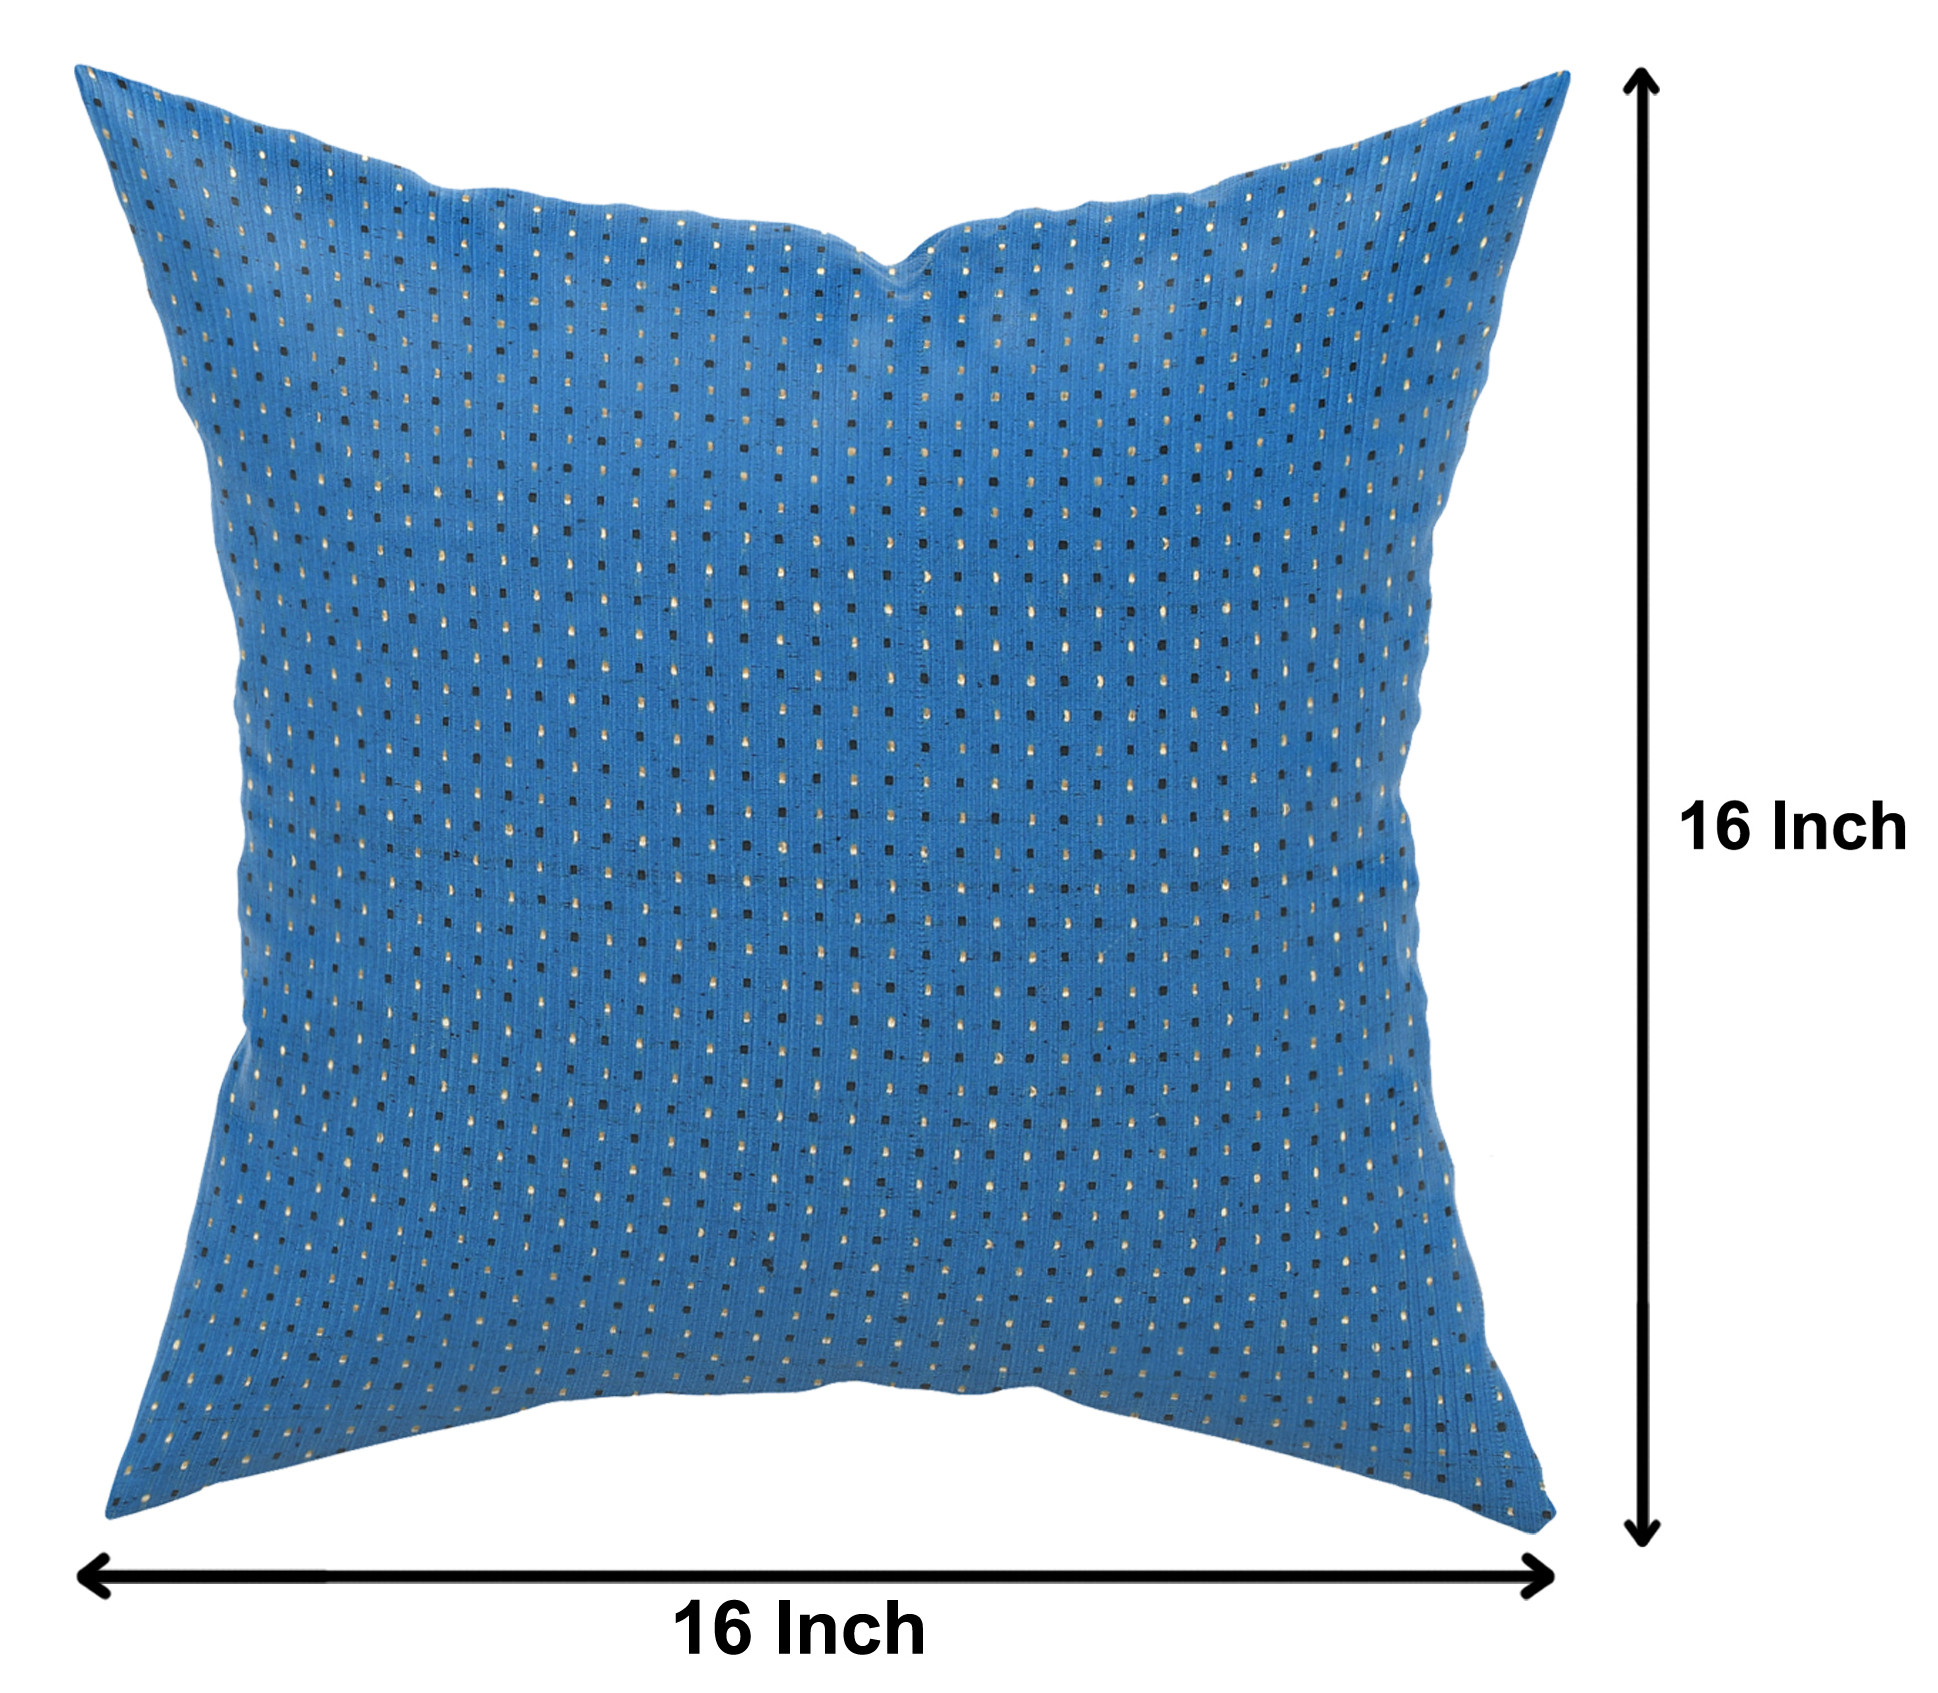 Kuber Industries Velvet Dot Printed Soft Decorative Square Throw Pillow Cover, Cushion Covers, Pillow Case For Sofa Couch Bed Chair 16x16 Inch-(Blue)